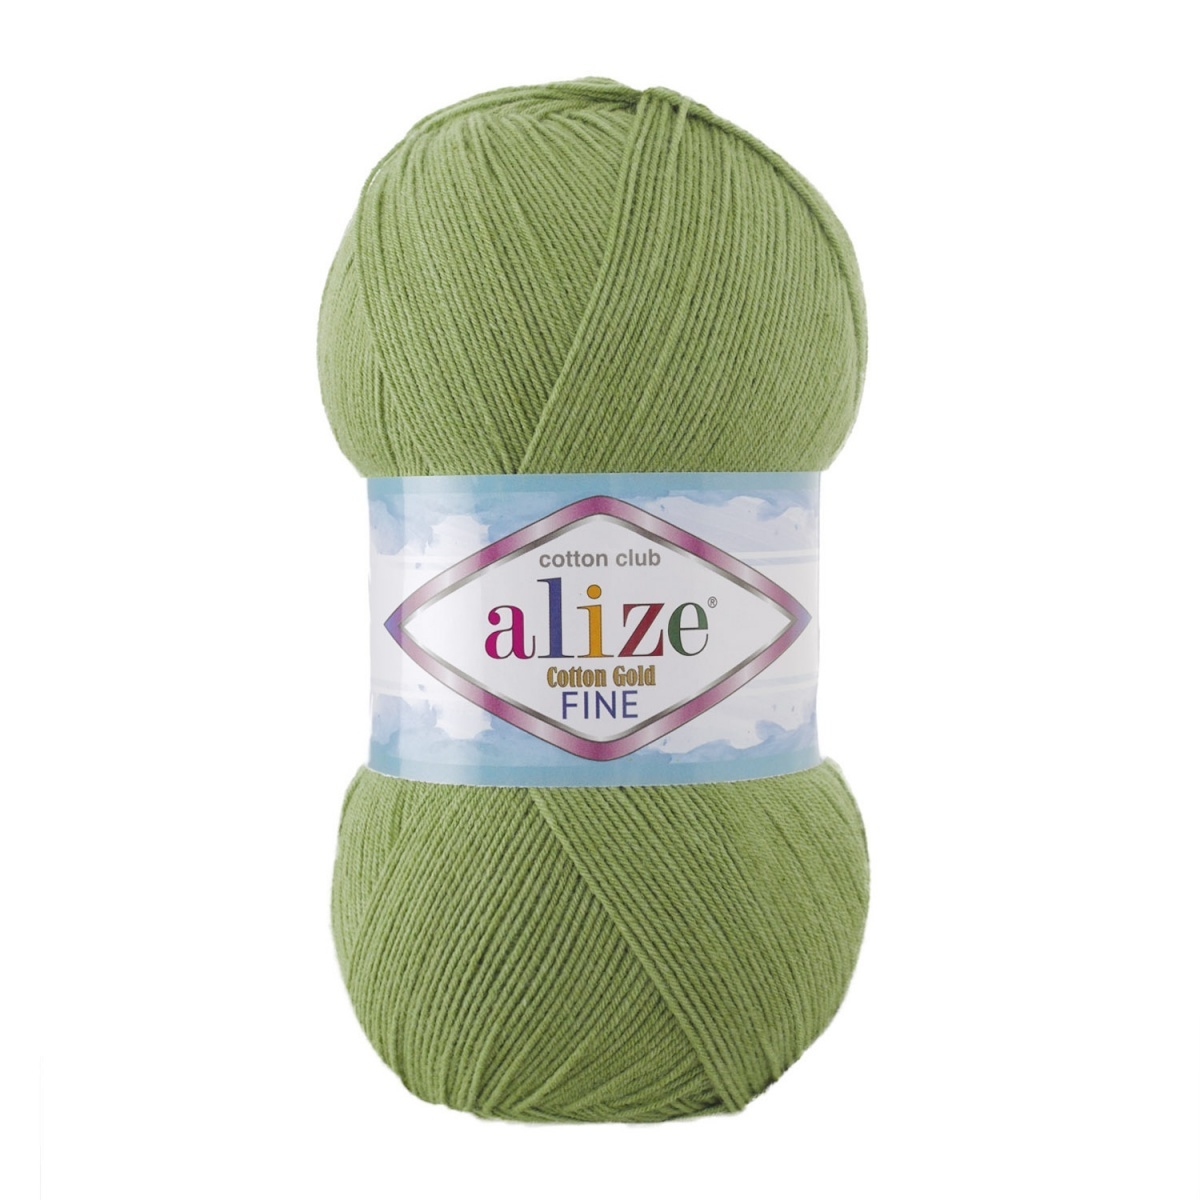 Alize Cotton Gold Fine 55% cotton, 45% acrylic 5 Skein Value Pack, 500g фото 1